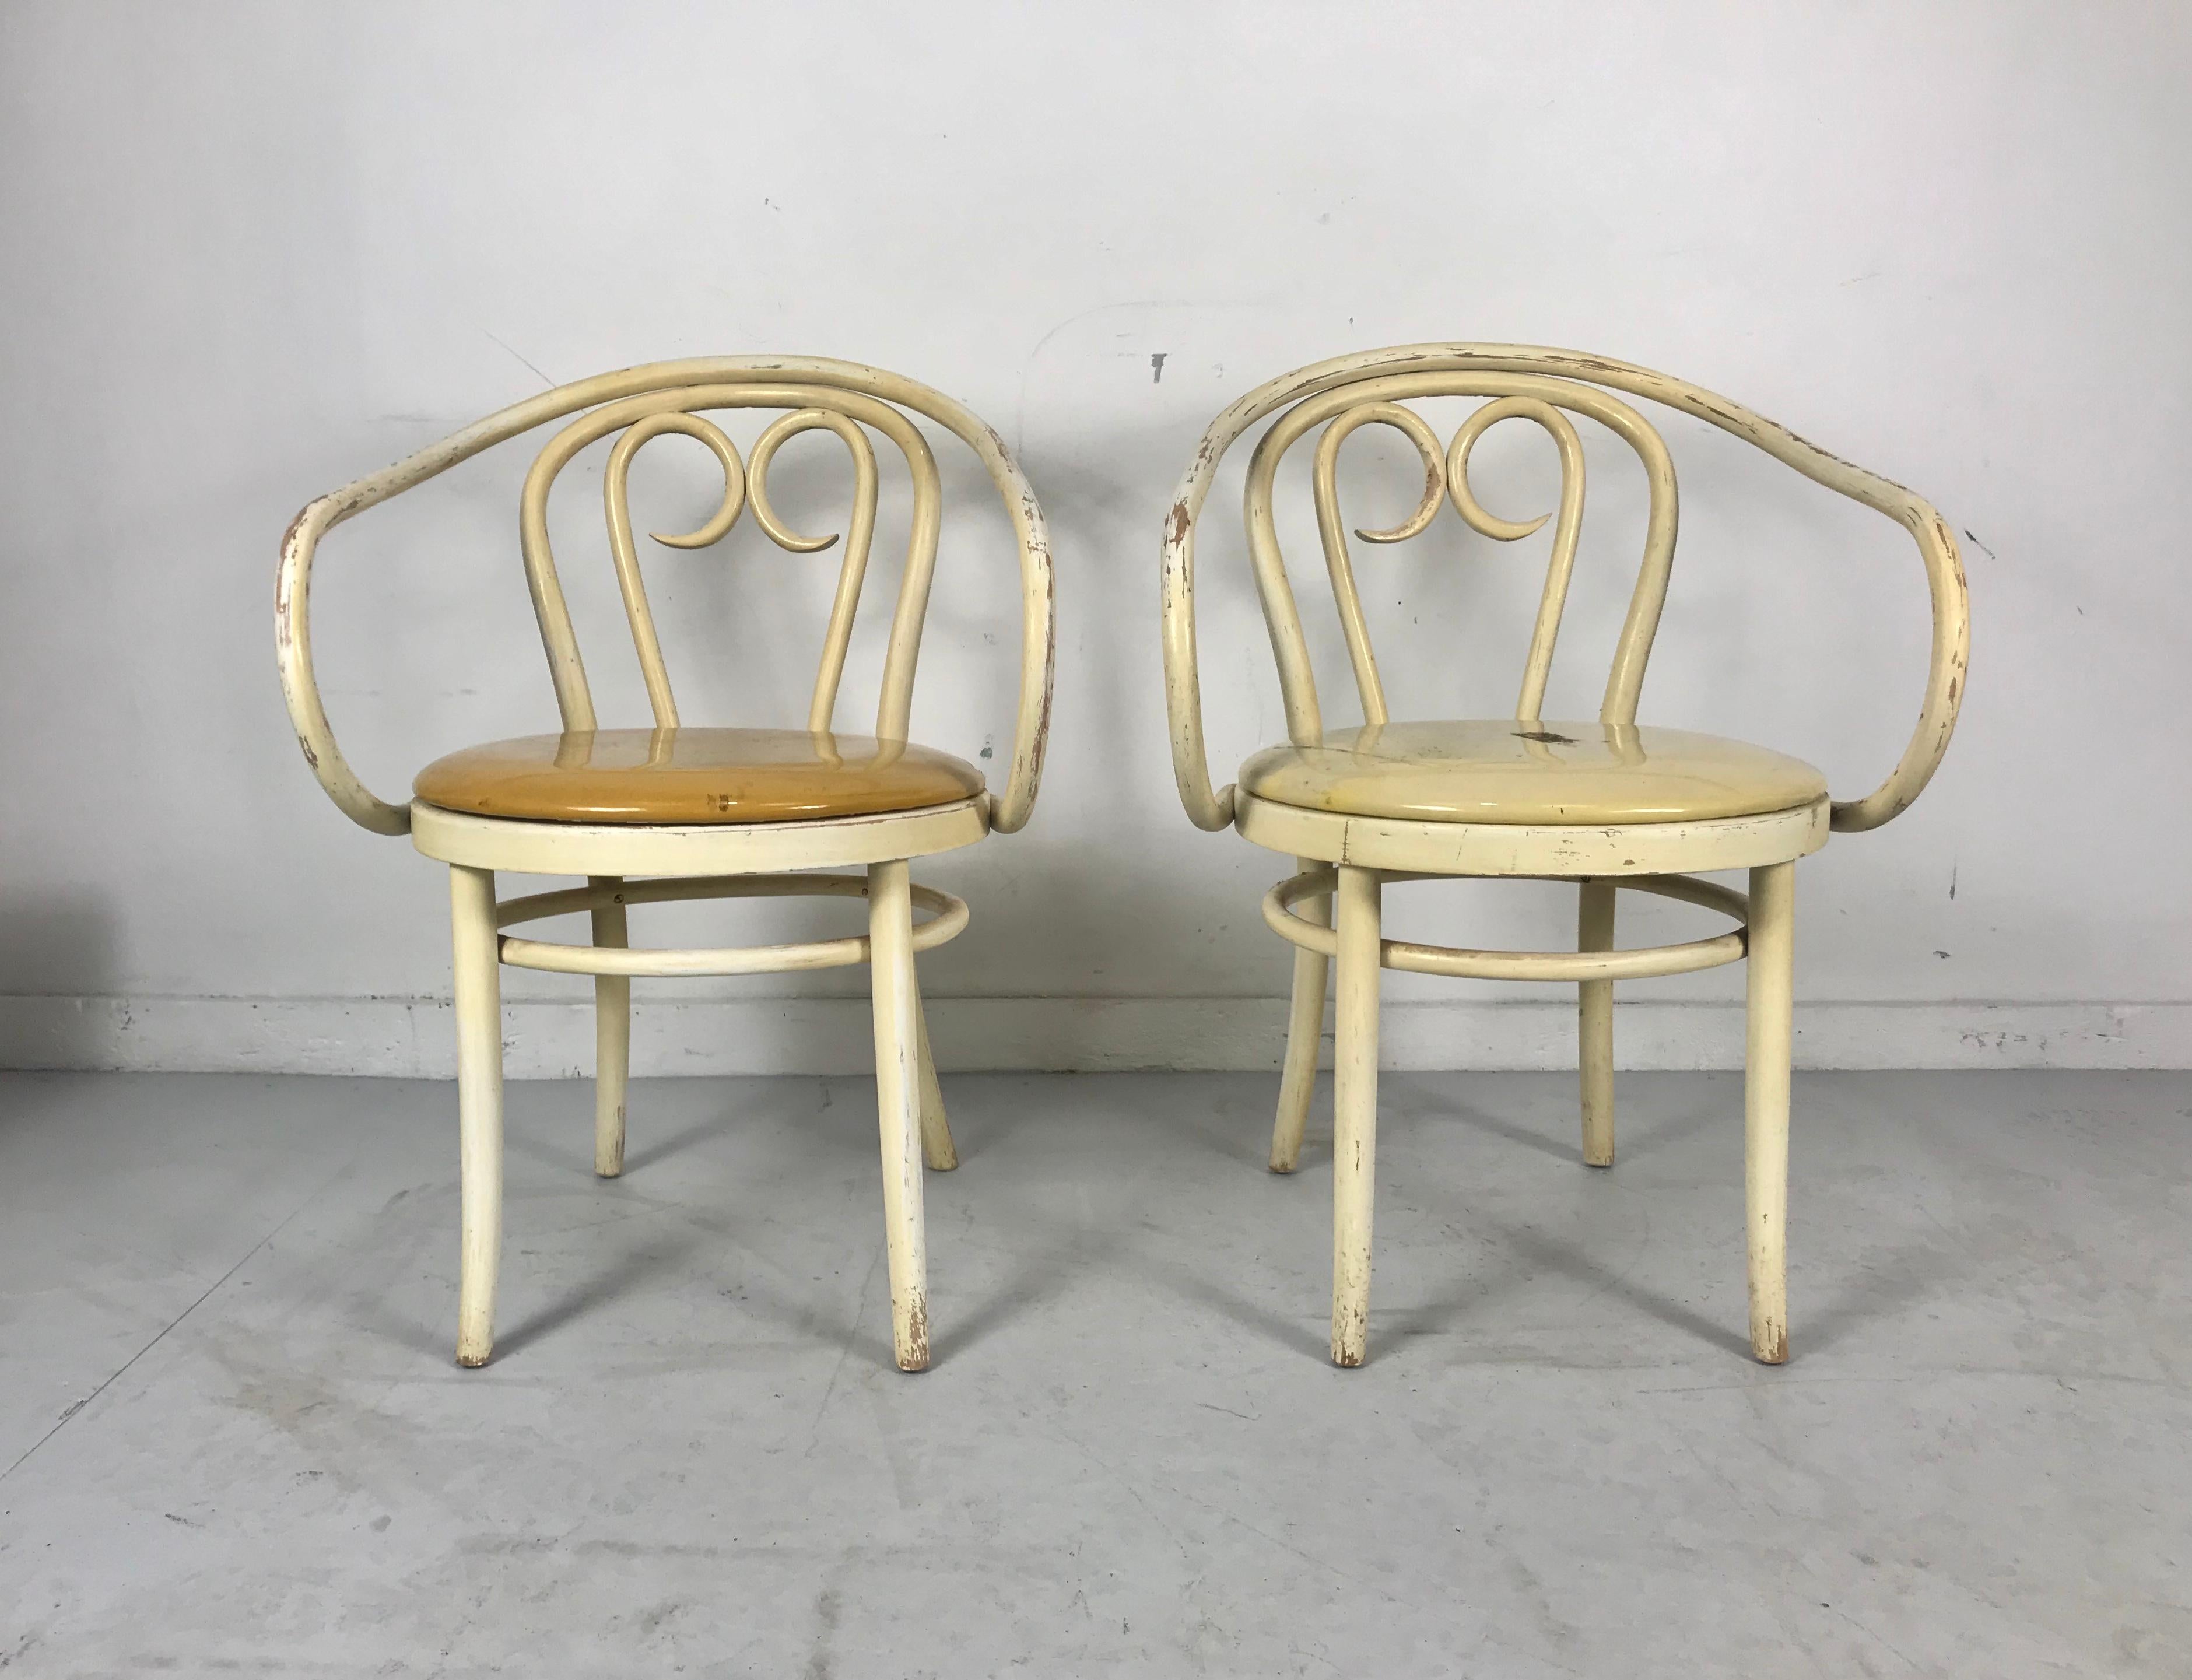 Most unusual set of modernist bentwood armchairs by Thonet ...This chair seems to be a blend of Classic Bauhaus style chairs designed by Michael Thonet, can’t seem to find another? Closely resembling the model 30, but with added inner bentwood curl,